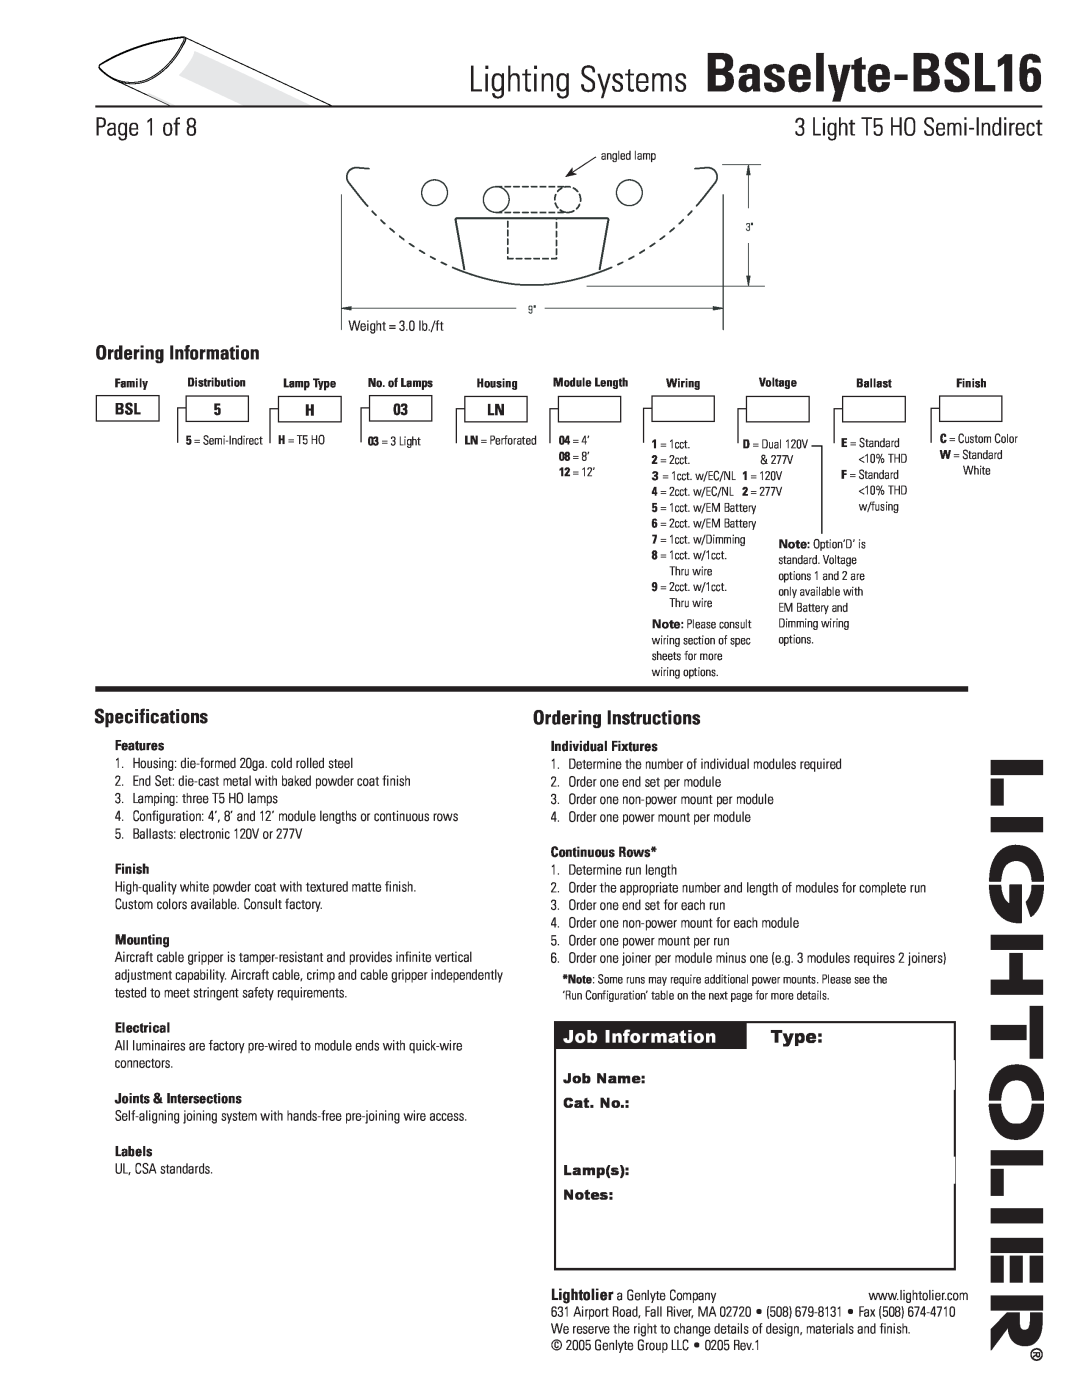 Lightolier Baselyte-BSL16 specifications Page  of, Light T5 HO Semi-Indirect, Ordering Information, Specifications, Type 